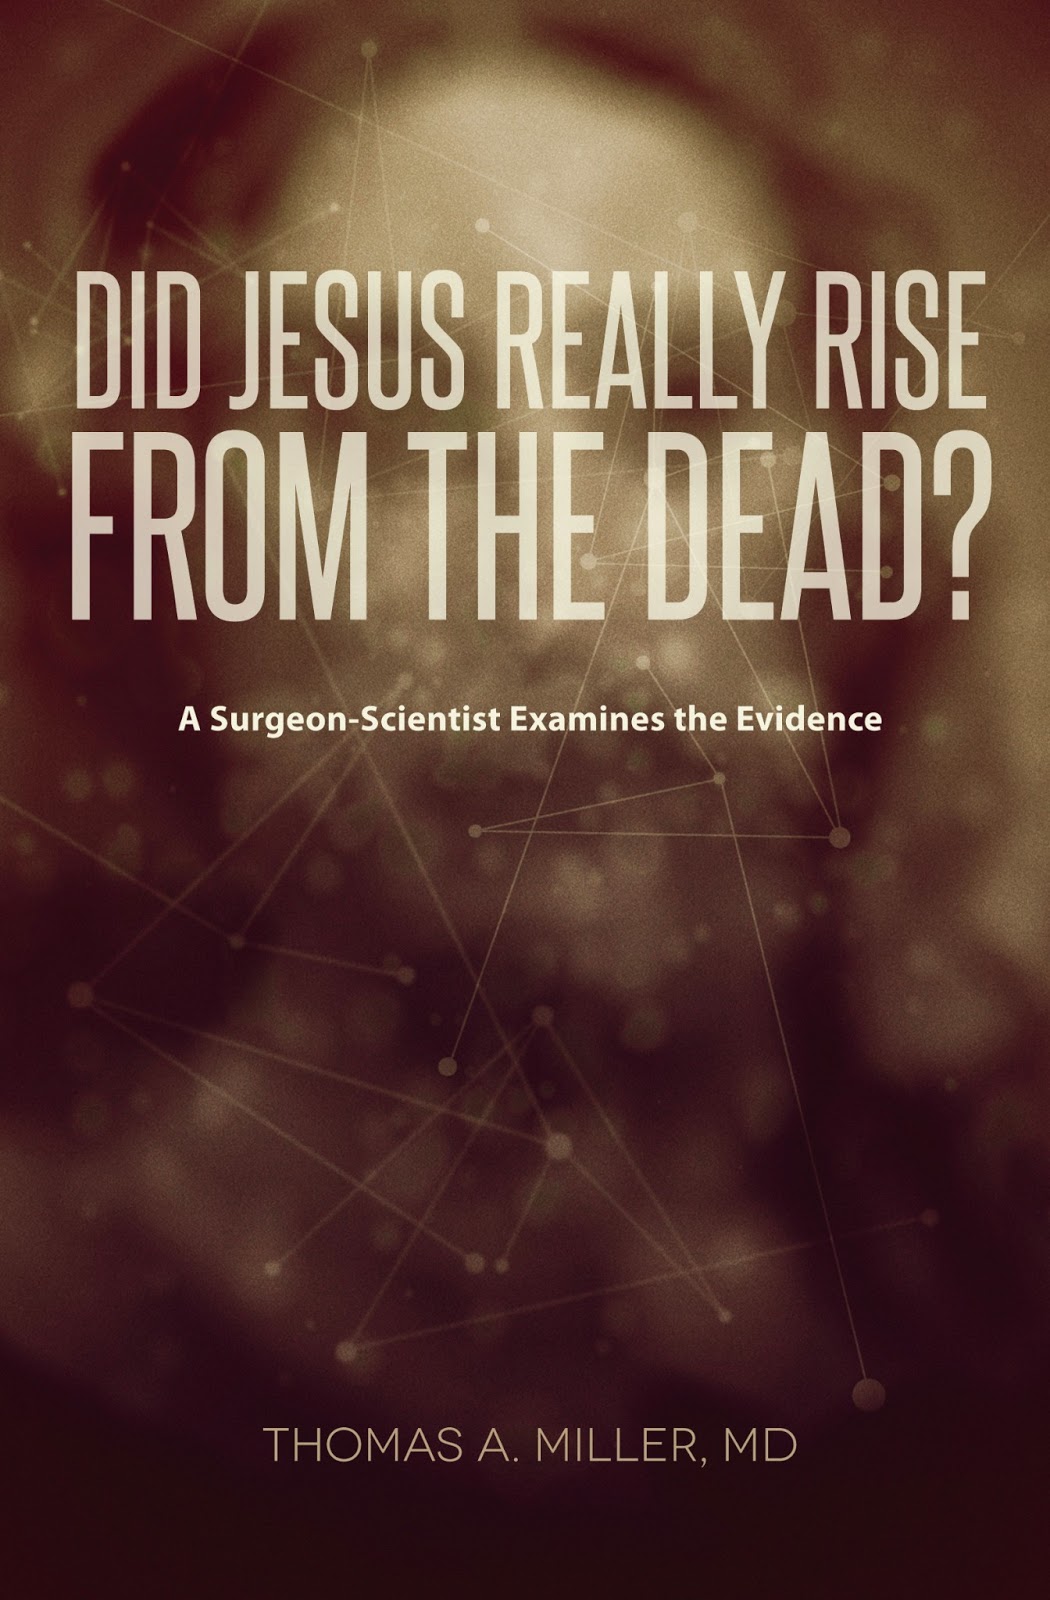 Did Jesus Really Rise from the Dead? A Surgeon-Scientist Examines the Evidence book cover